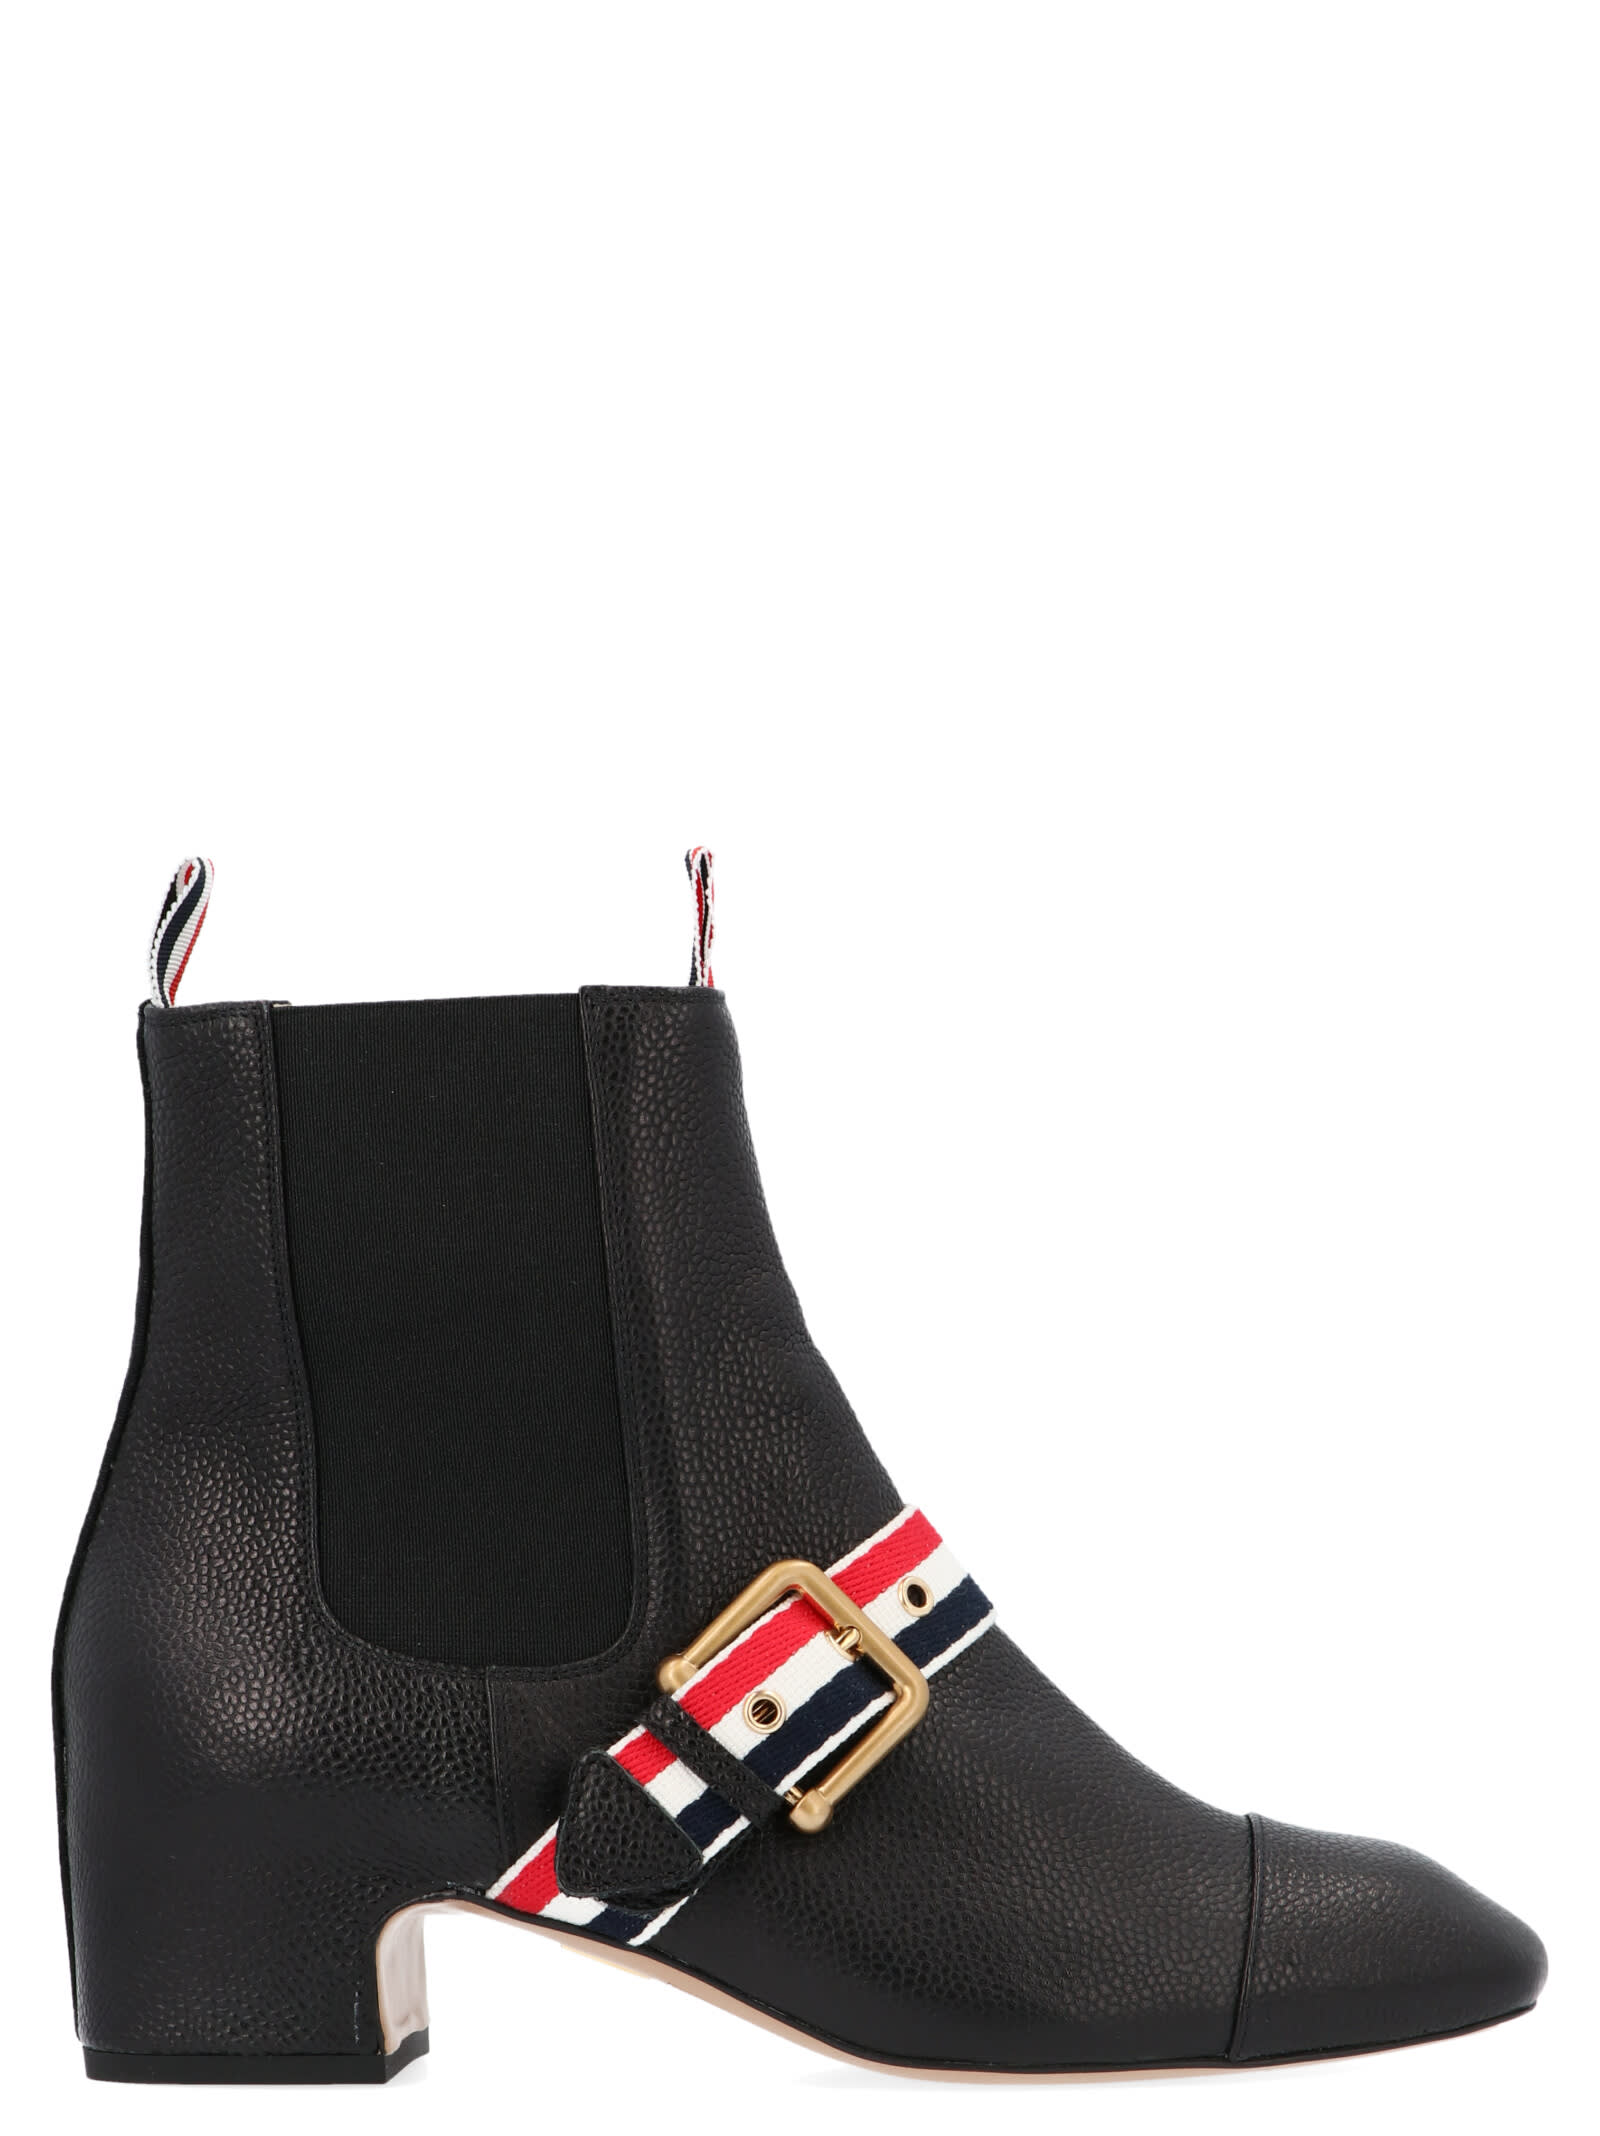 thom browne chelsea boots